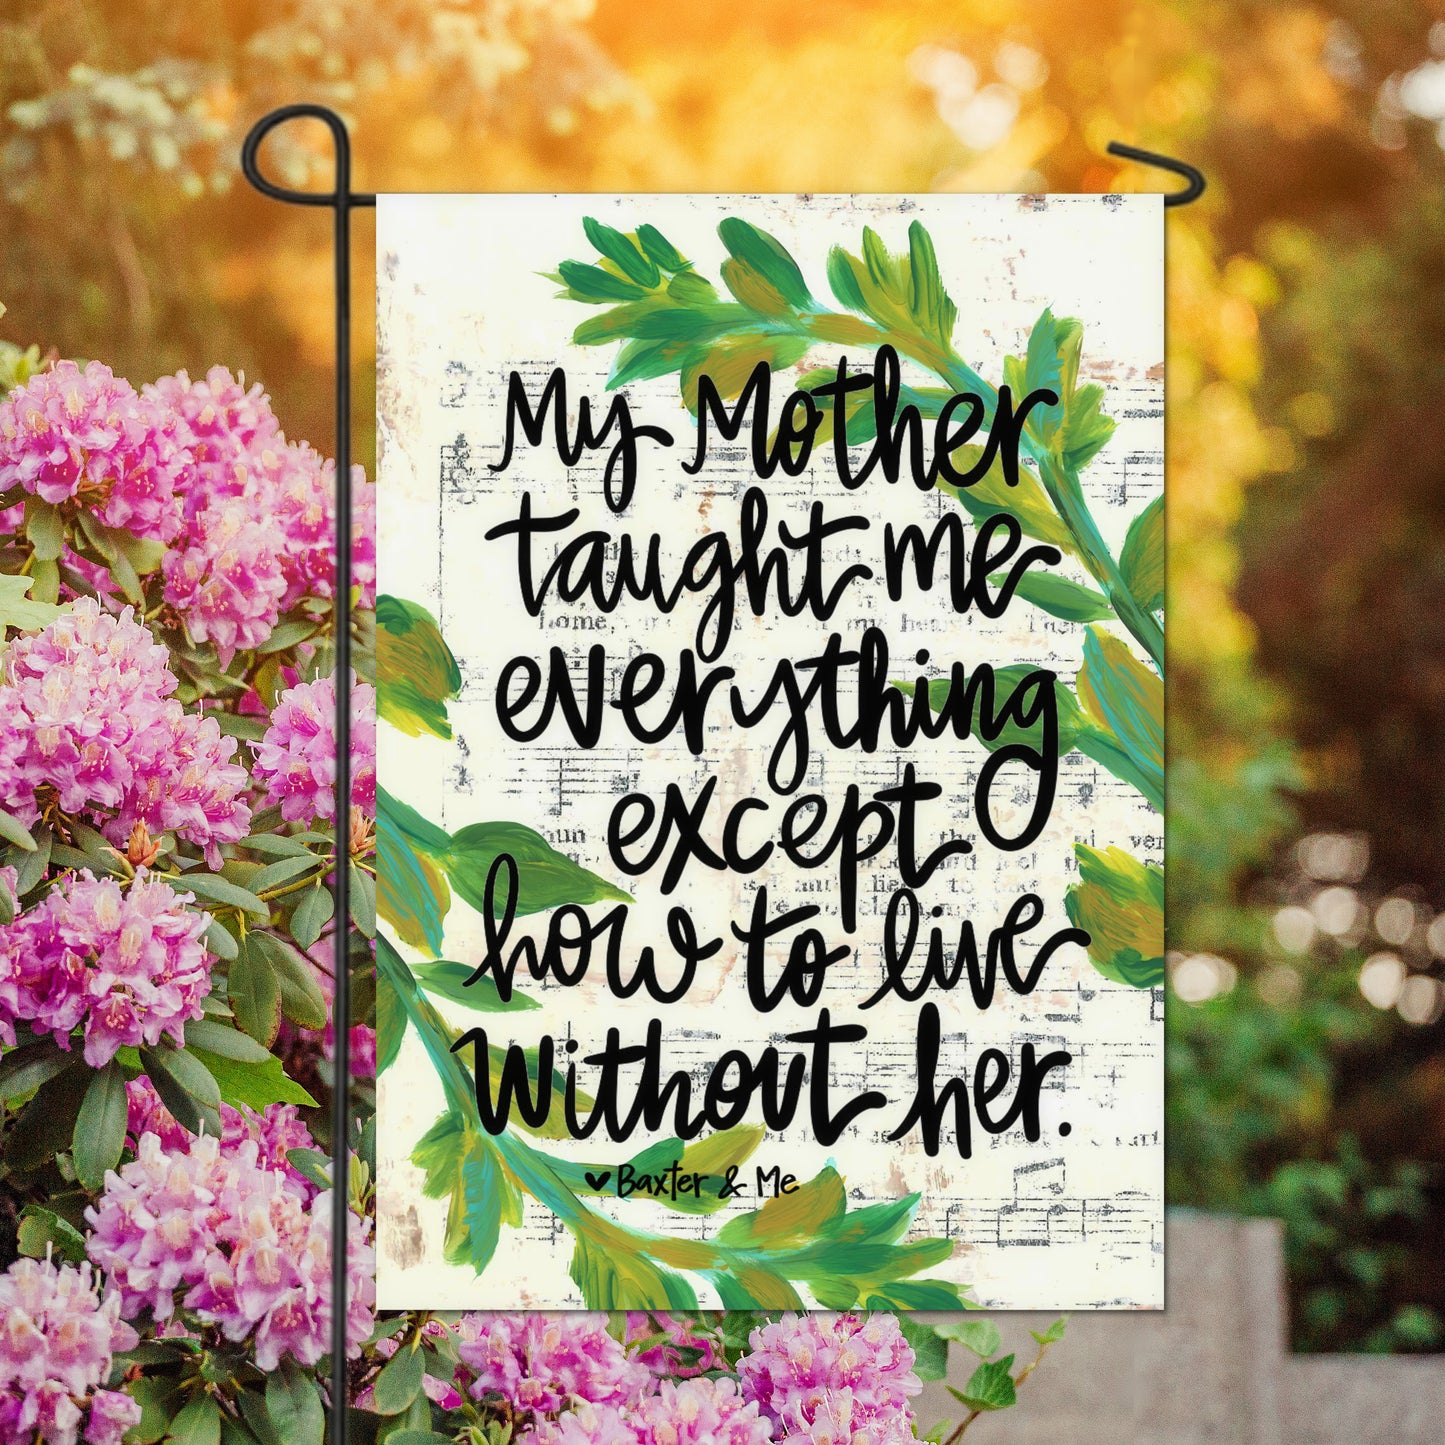 Mother Taught Me Everything Garden Flag